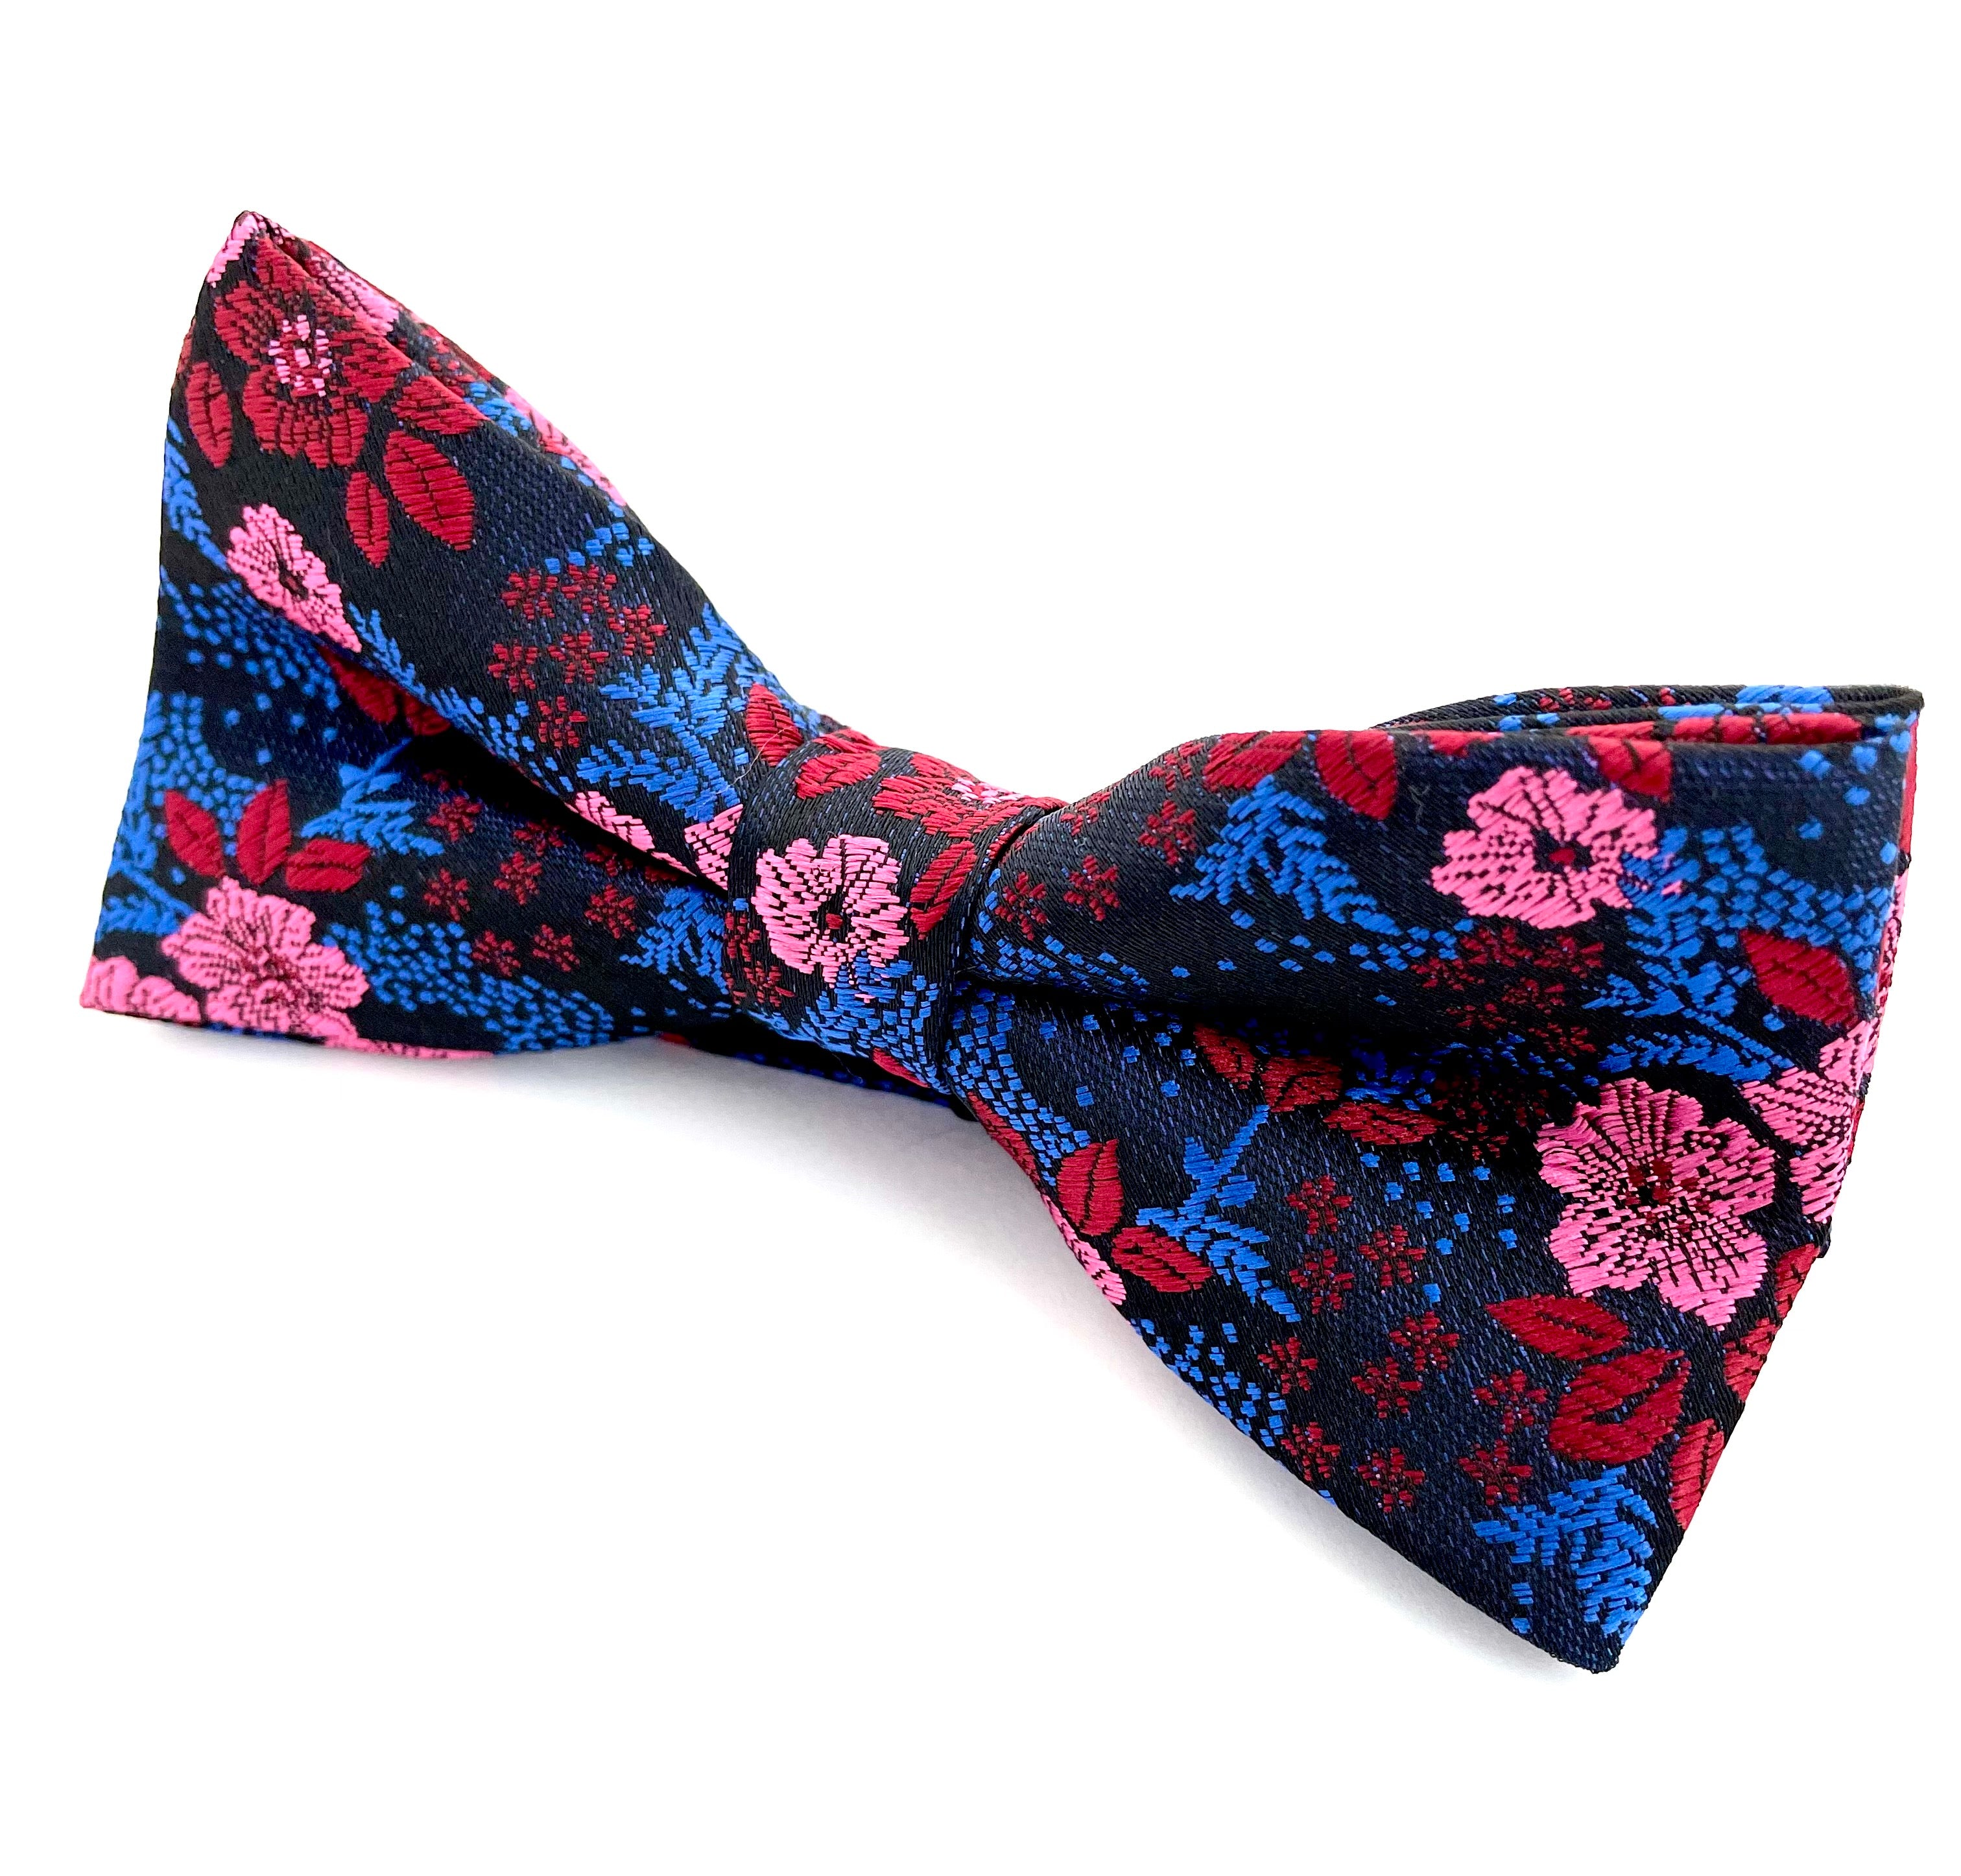 Bowtie Classic - Lyserøde blomster